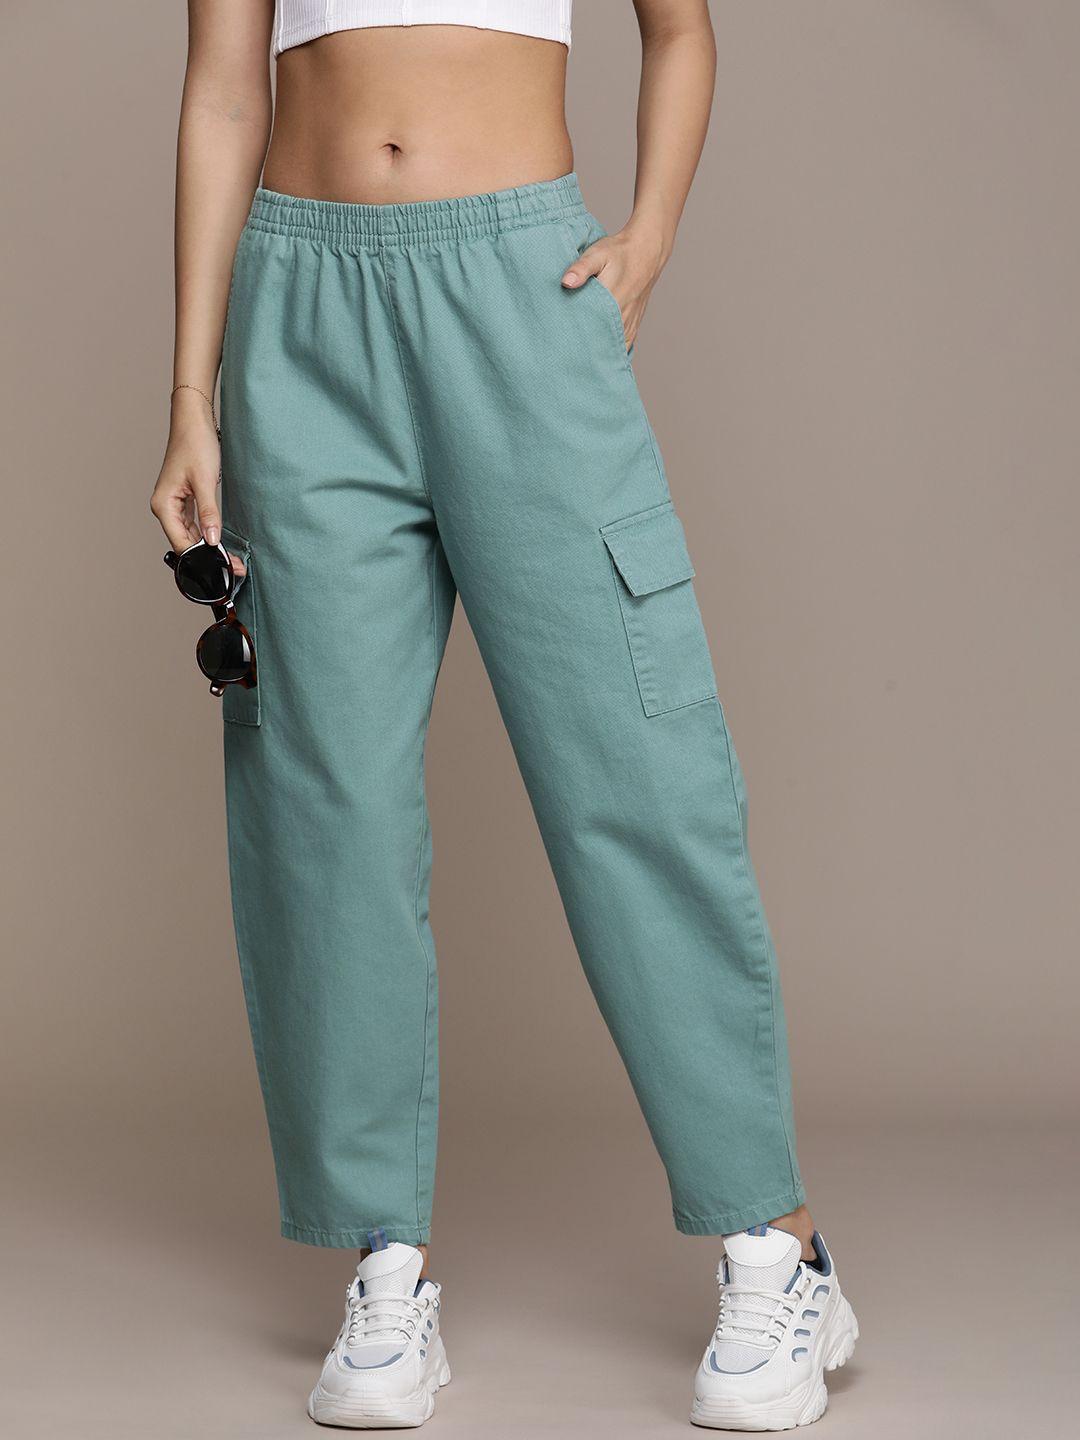 the-roadster-life-co.-women-pure-cotton-solid-trouser